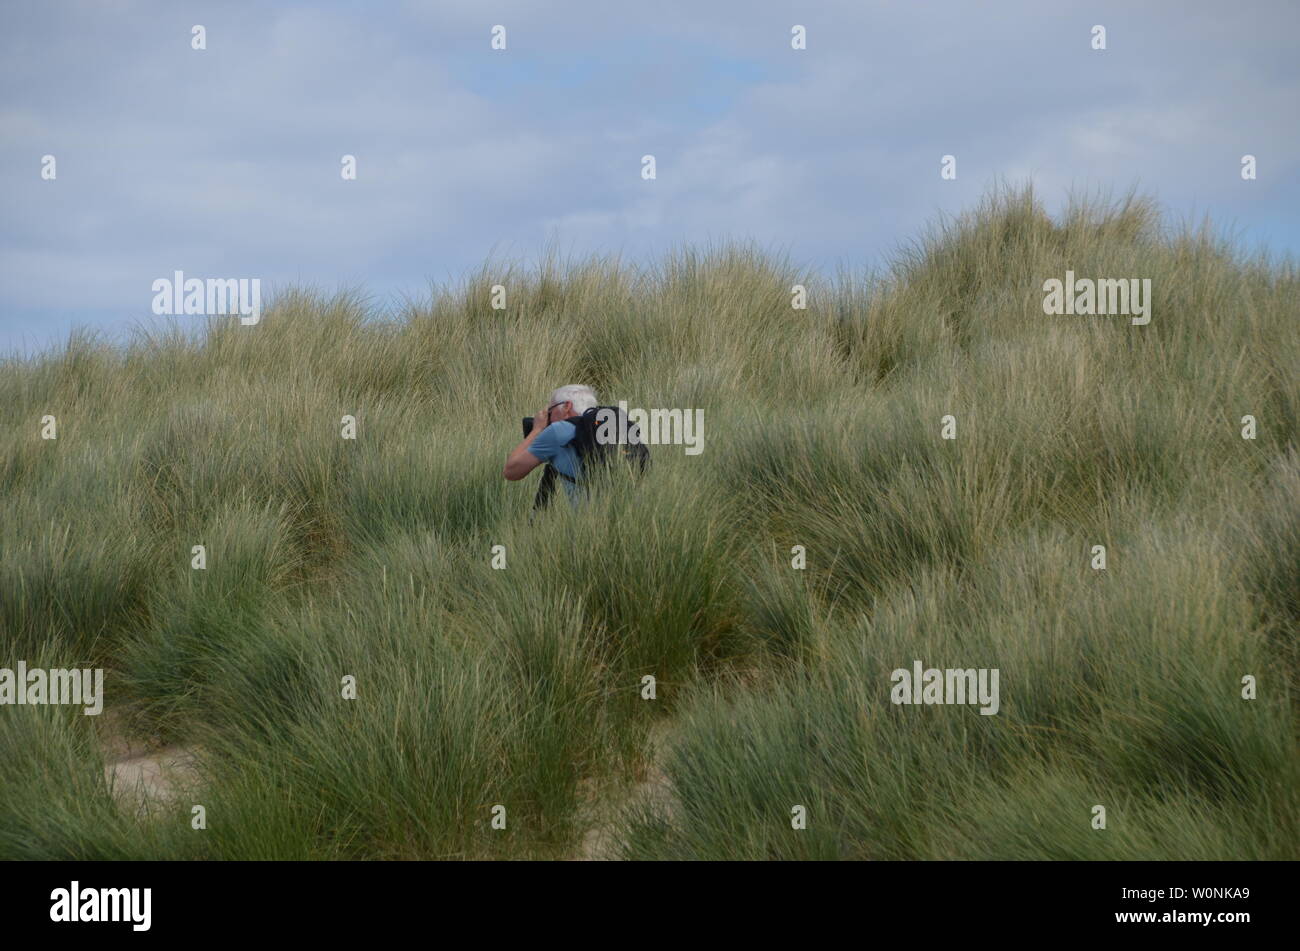 A top half of a photographer with a camera on a tripod, standing in the long grass, waiting for a photo opportunity. Stock Photo